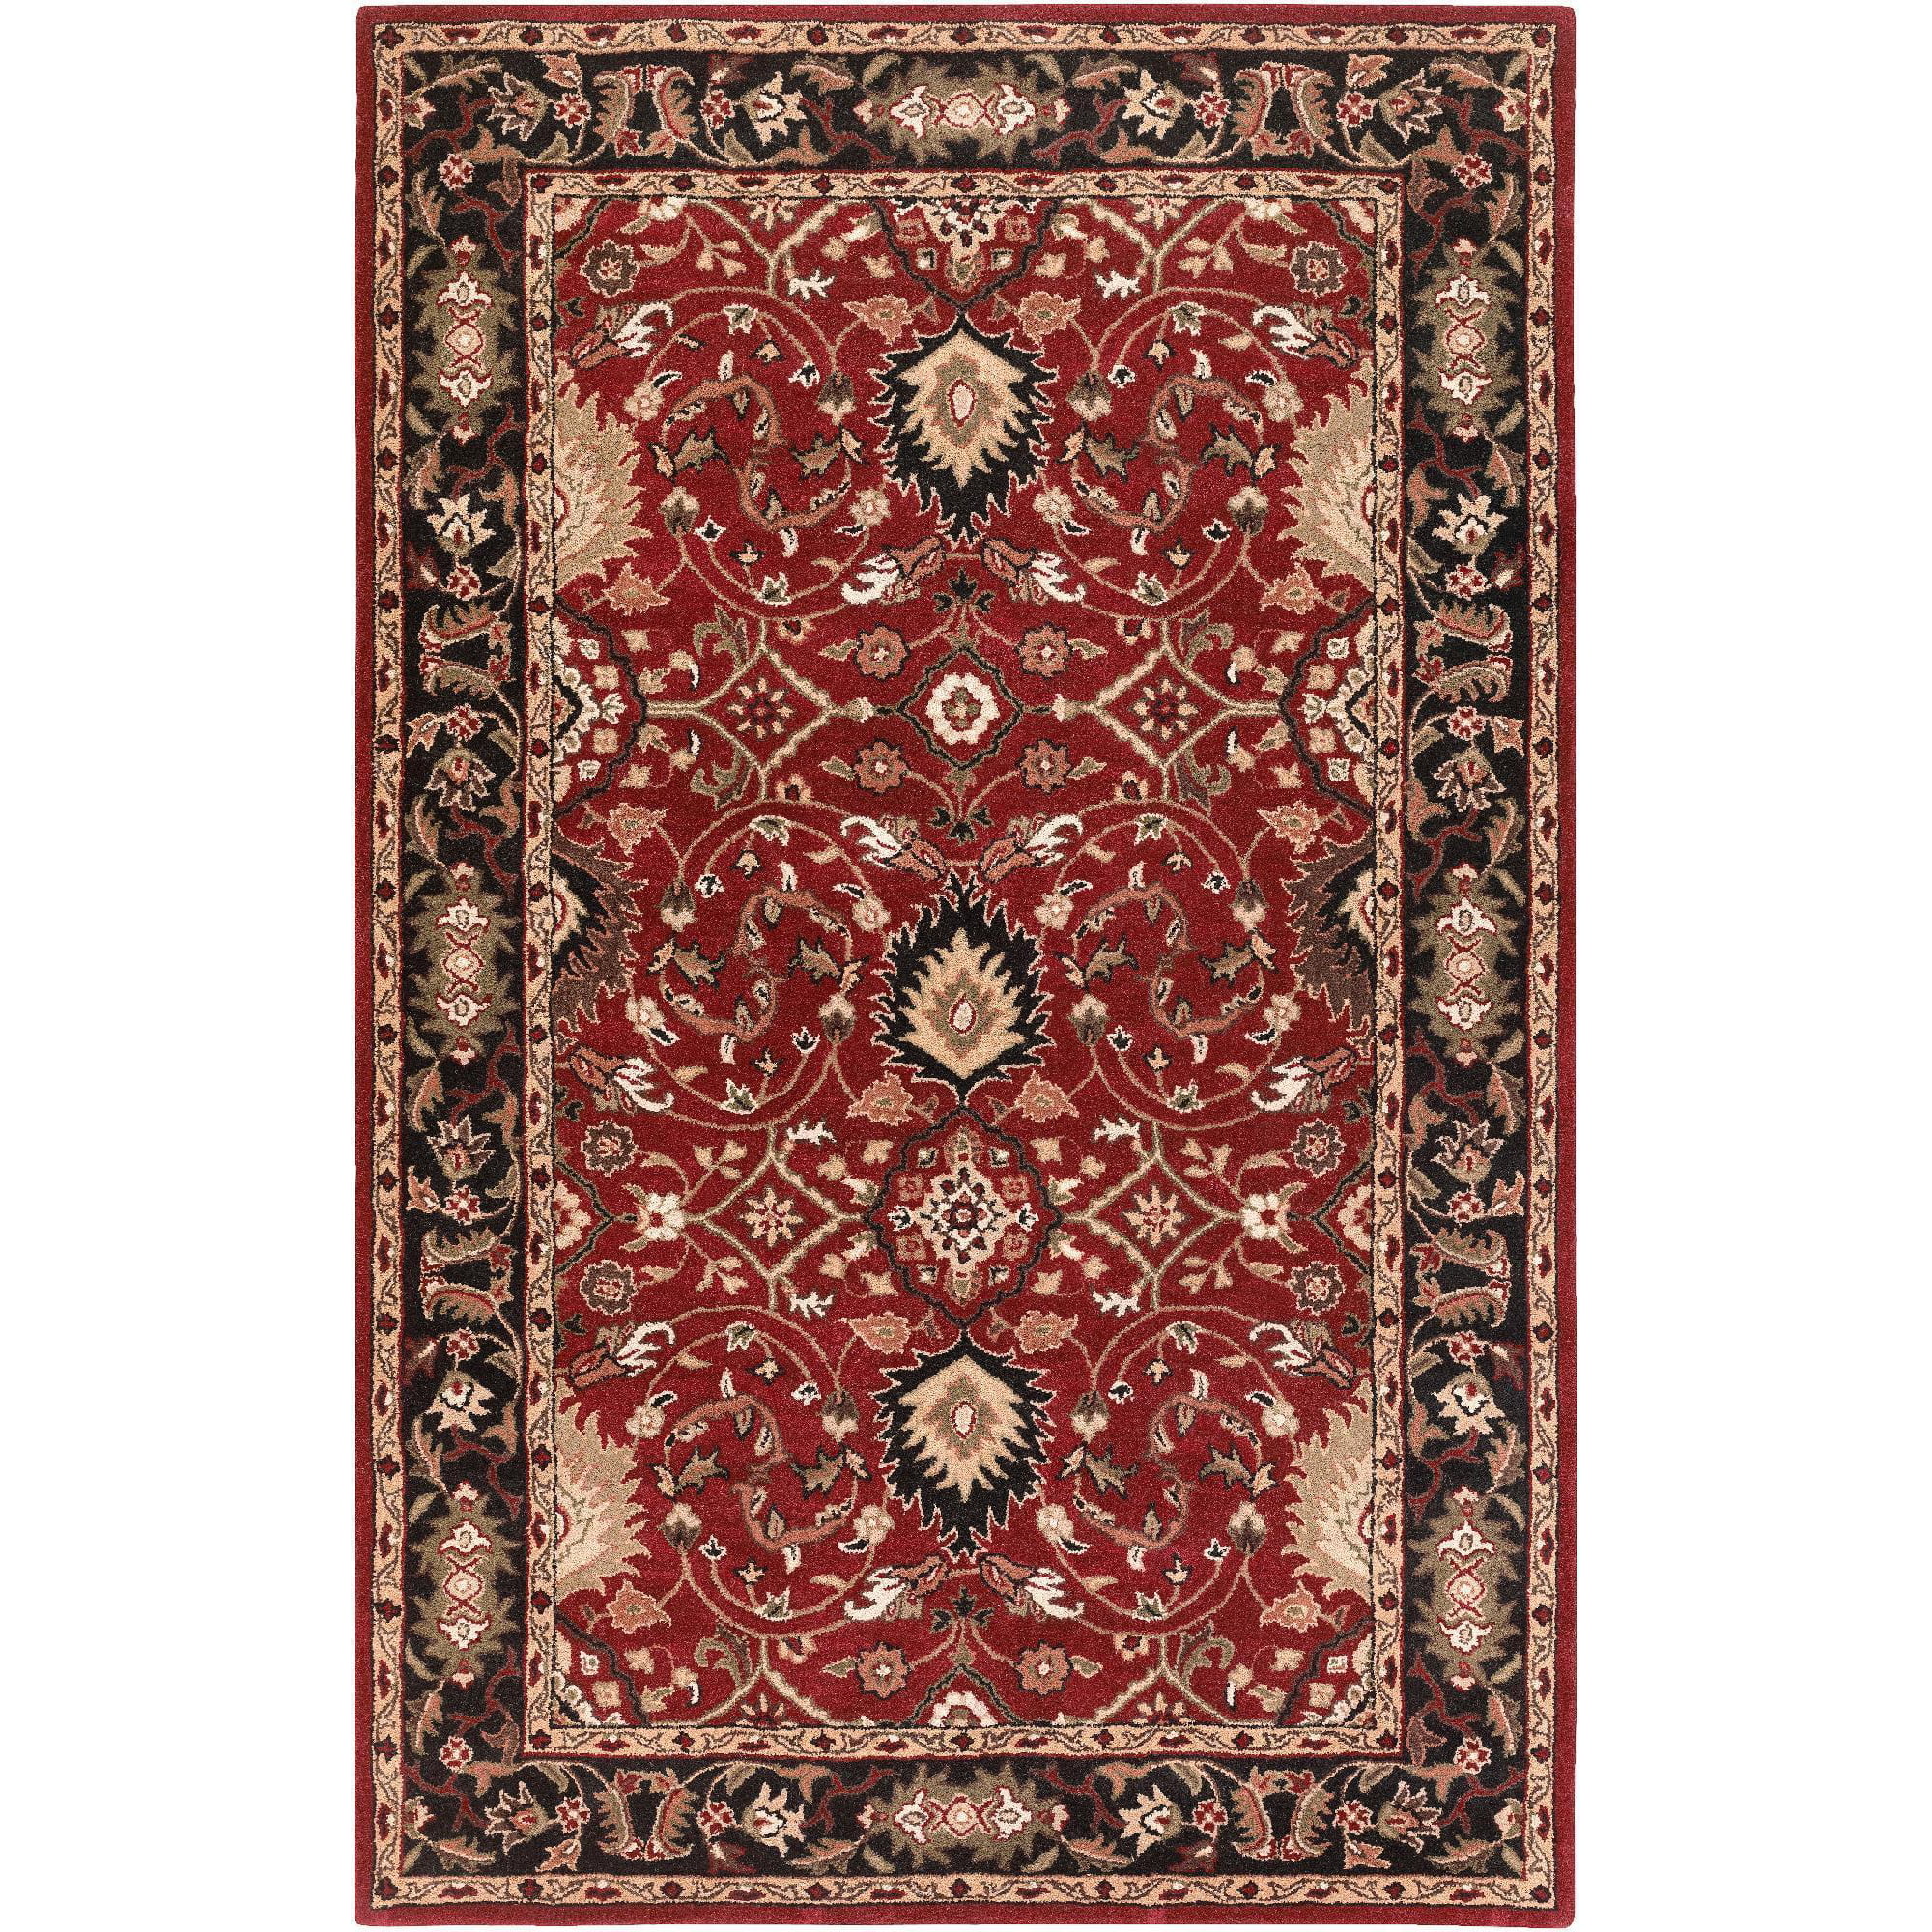 Mark&Day Area Rugs, 2x3 Paris Traditional Burgundy Area Rug (2' x 3') 